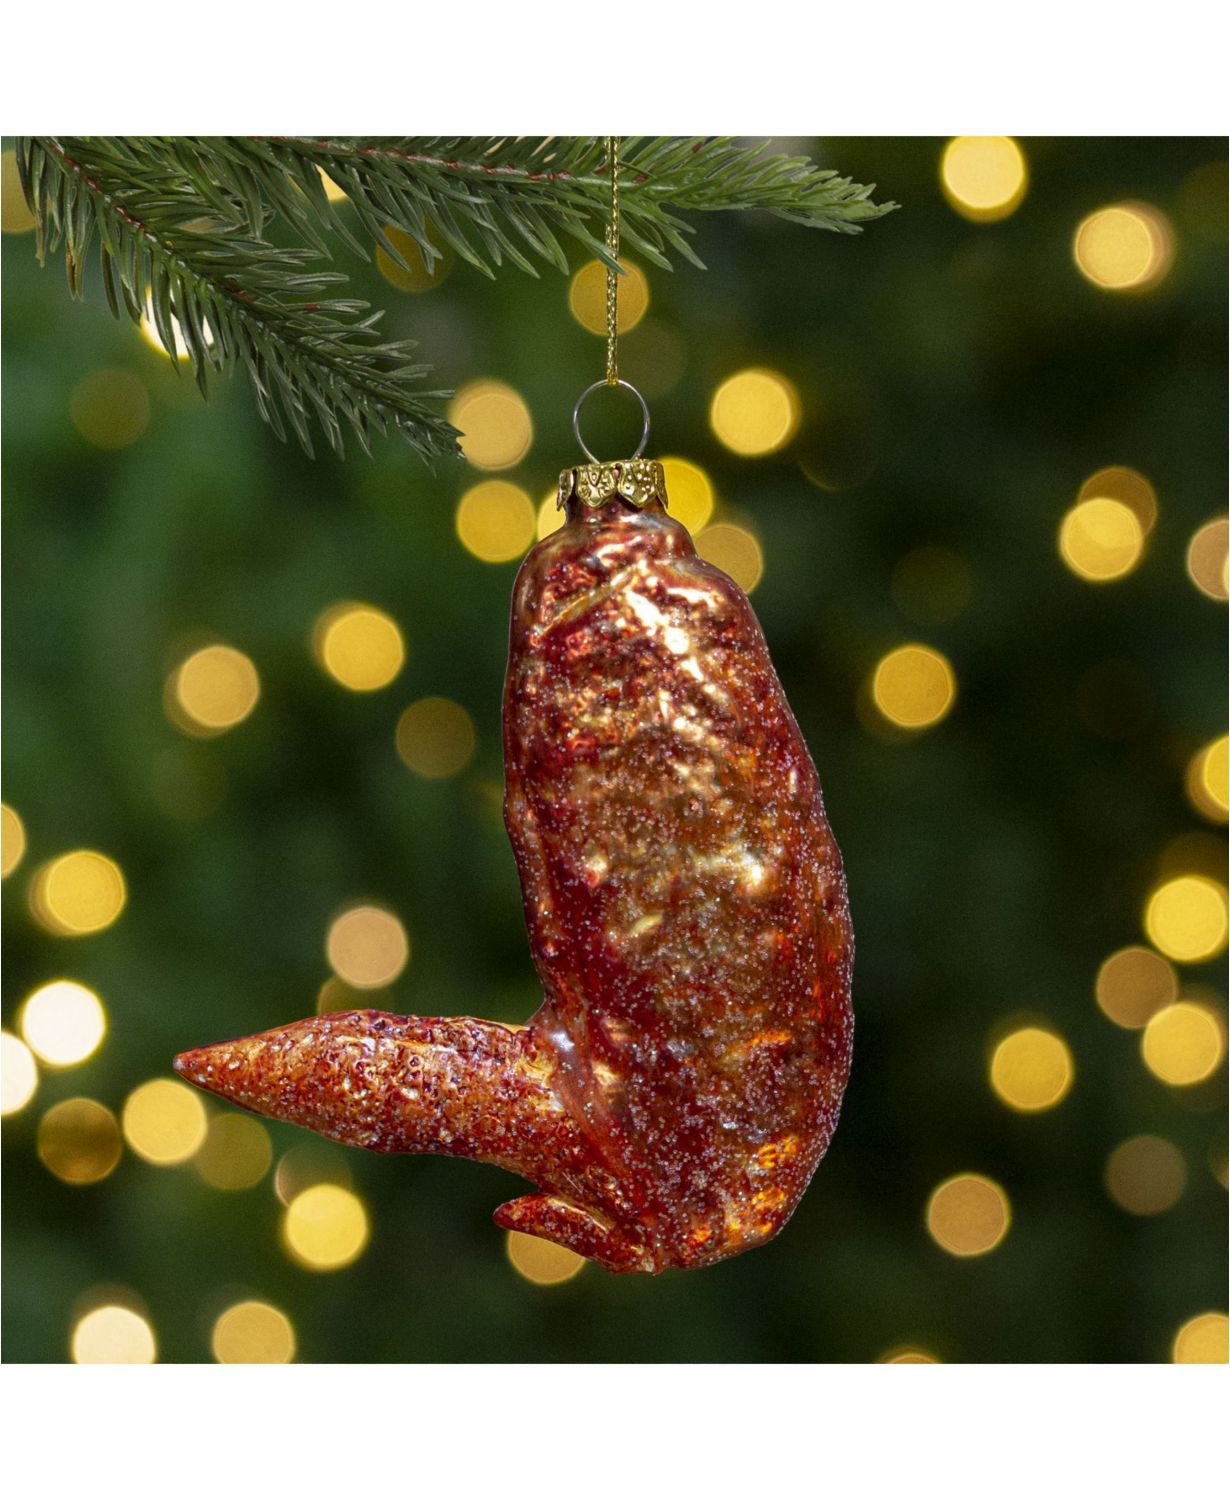 20 Funny Ornaments for Your Christmas Tree 2022 - Weird Holiday